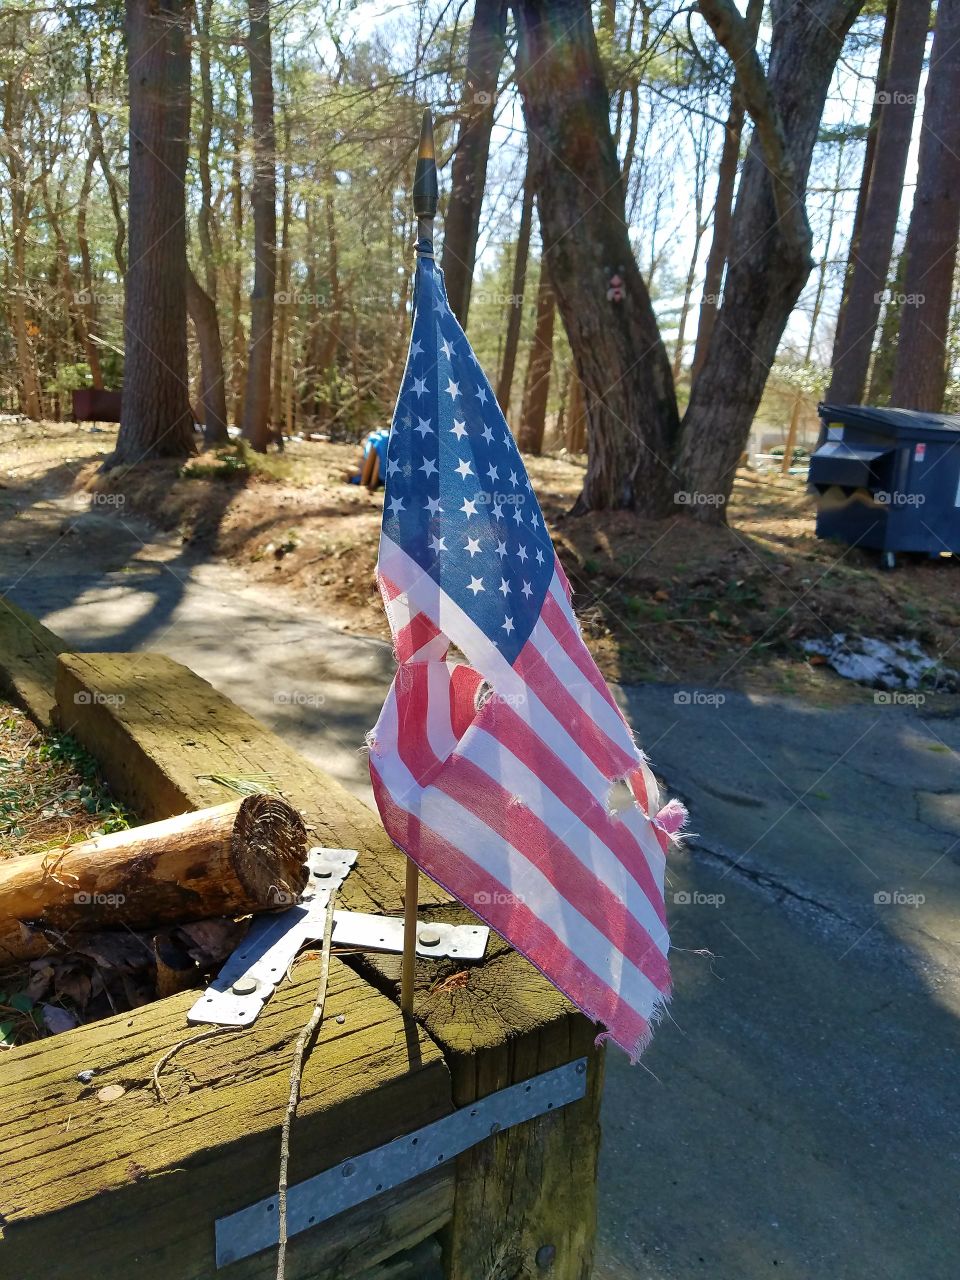 A small sized USA Flag stuck in the garden that survived the Winter, it's a tattered, weathered flag now but still standing strong!